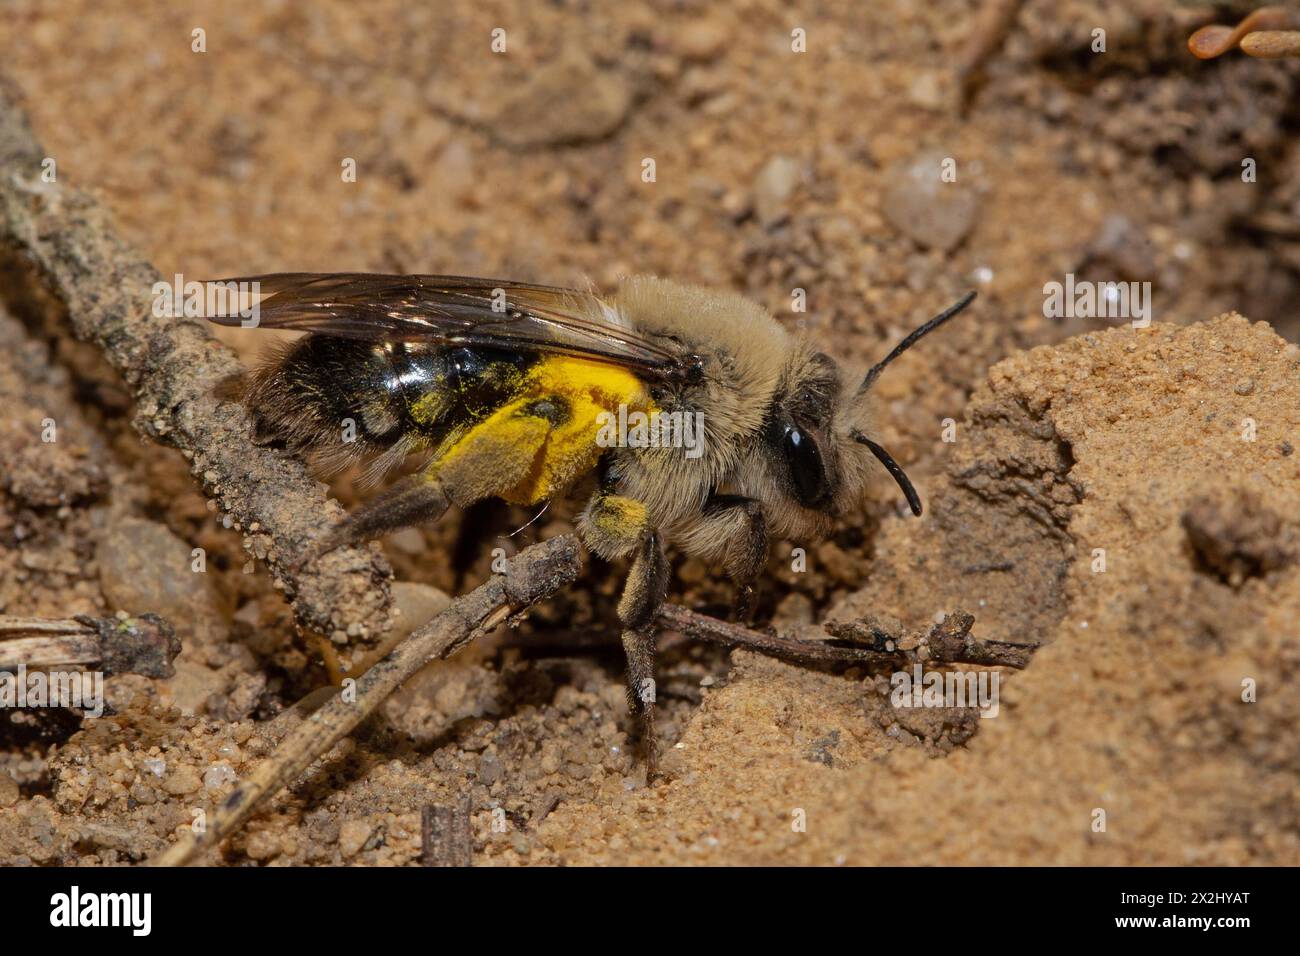 Willow sand bee with yellow pollen sitting on sand, looking right Stock Photo